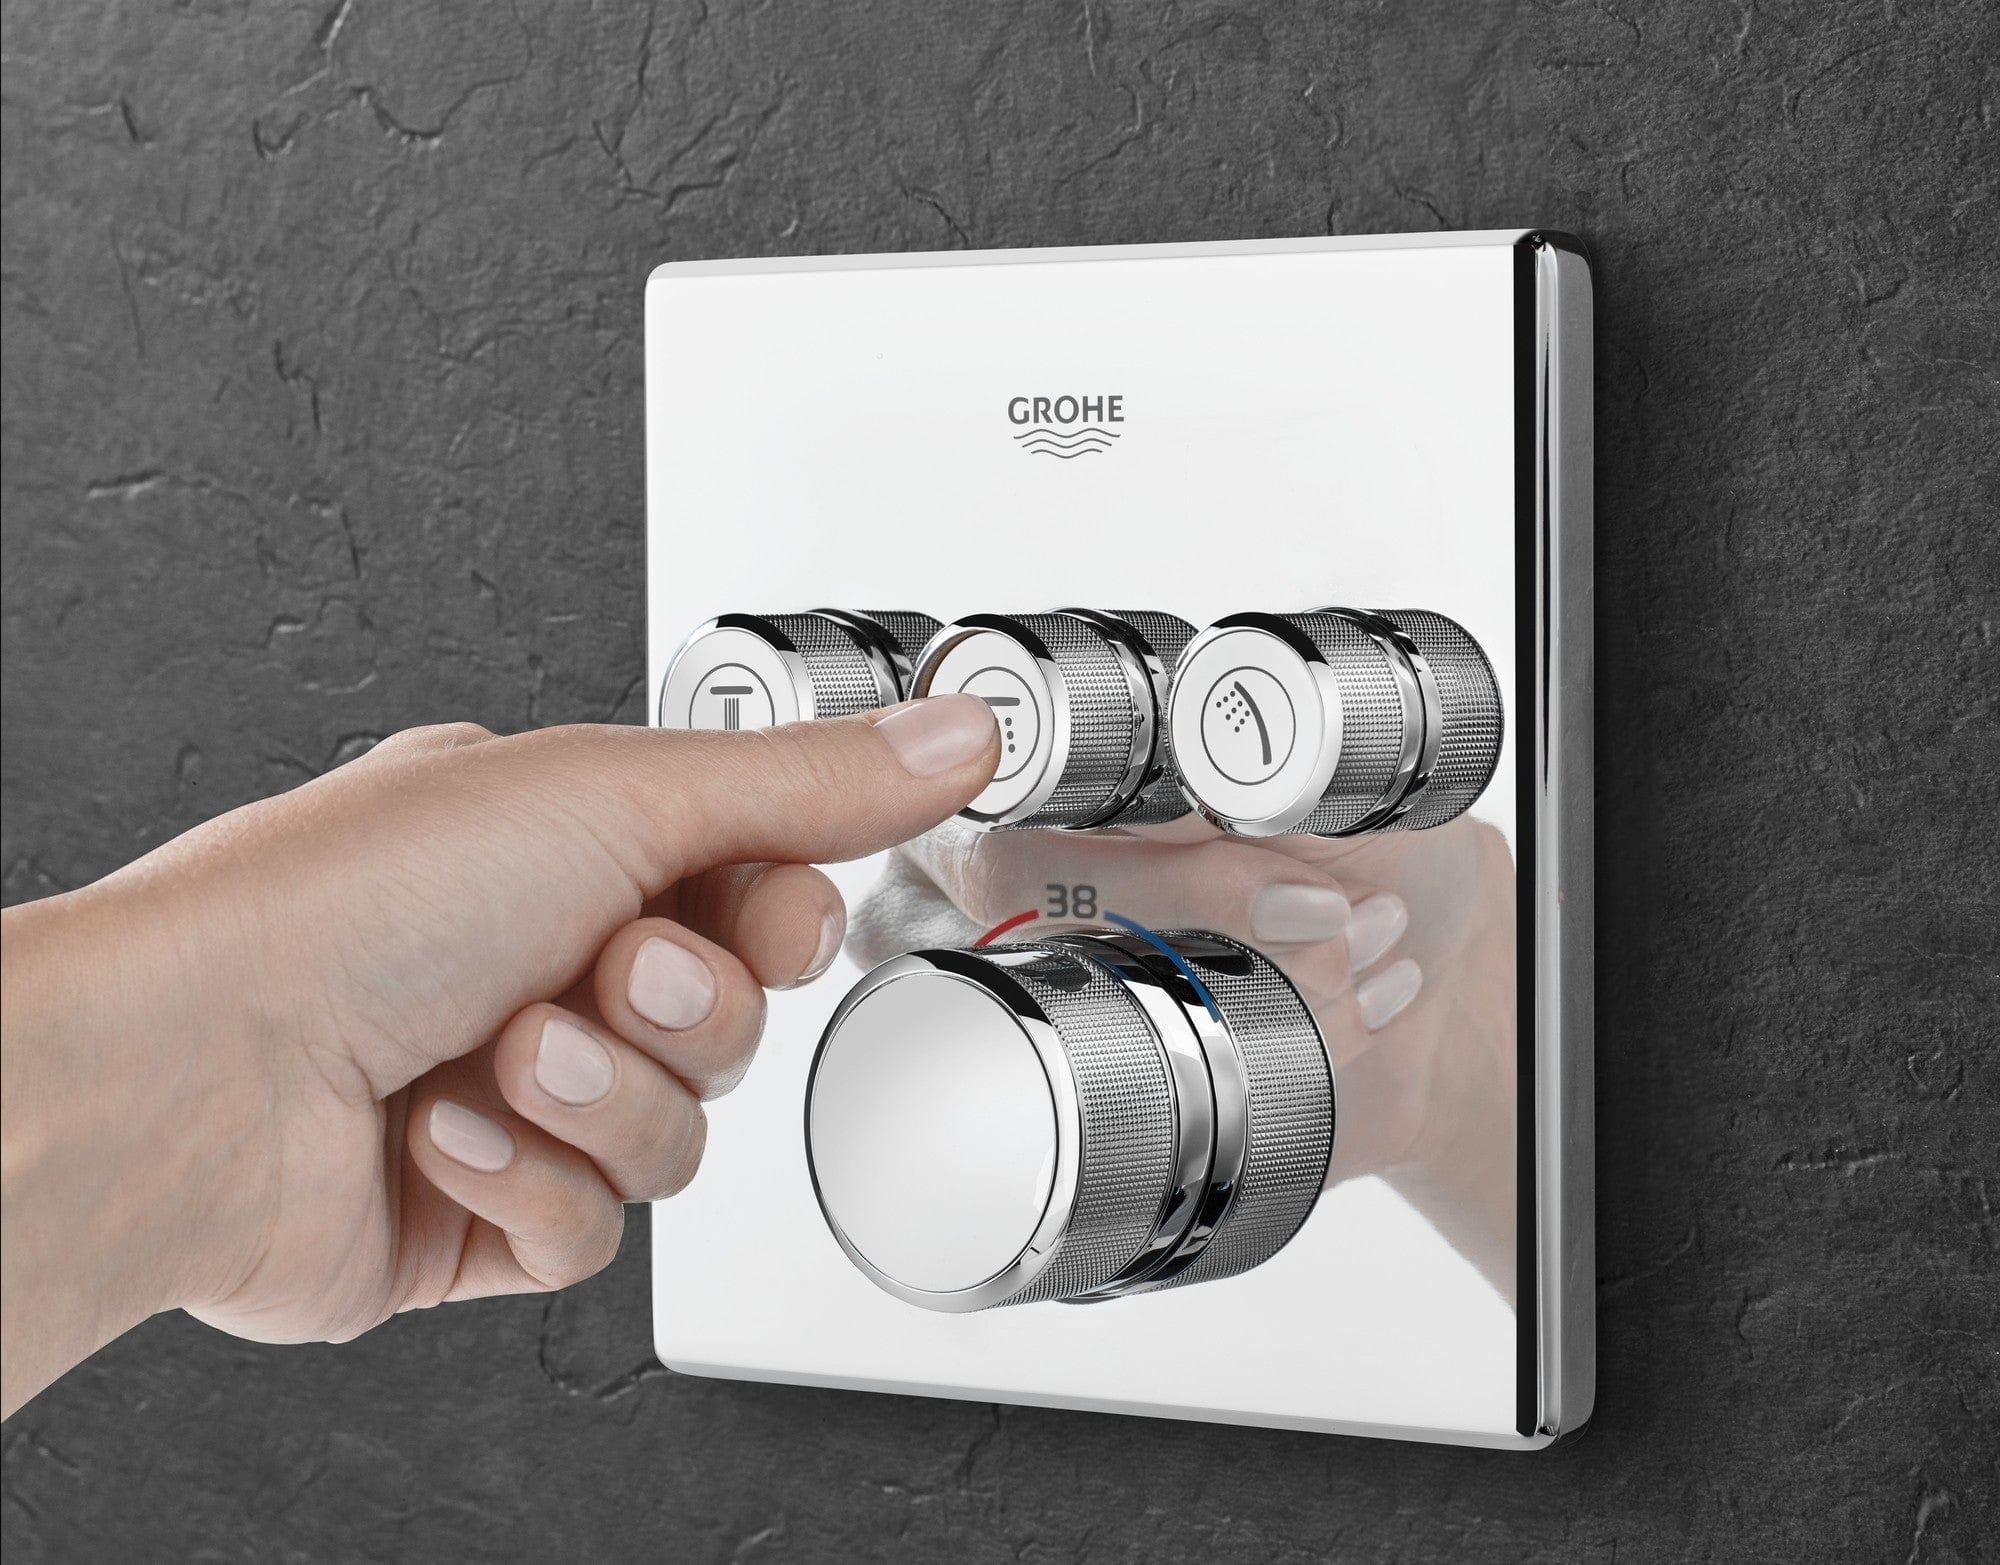 Grohe Grohtherm Smartcontrol Thermostat for Concealed Installation with 3 Valves - Square | Supply Master | Accra, Ghana Bathroom Faucet Buy Tools hardware Building materials